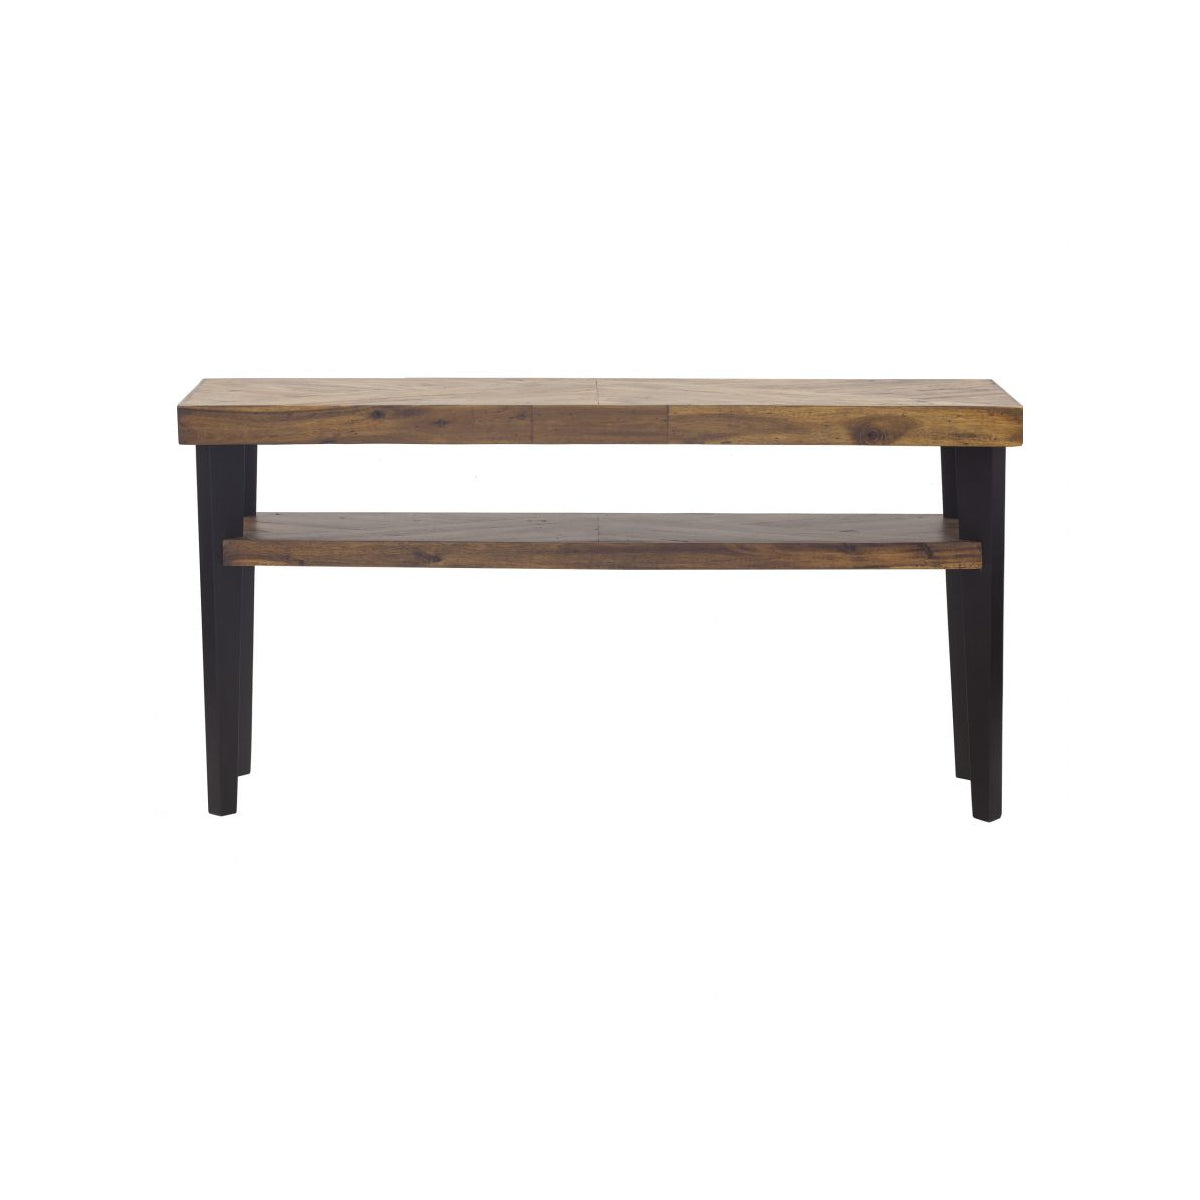 Load image into Gallery viewer, Parq Console Table Console Tables Moe&amp;#39;s     Four Hands, Burke Decor, Mid Century Modern Furniture, Old Bones Furniture Company, Old Bones Co, Modern Mid Century, Designer Furniture, https://www.oldbonesco.com/
